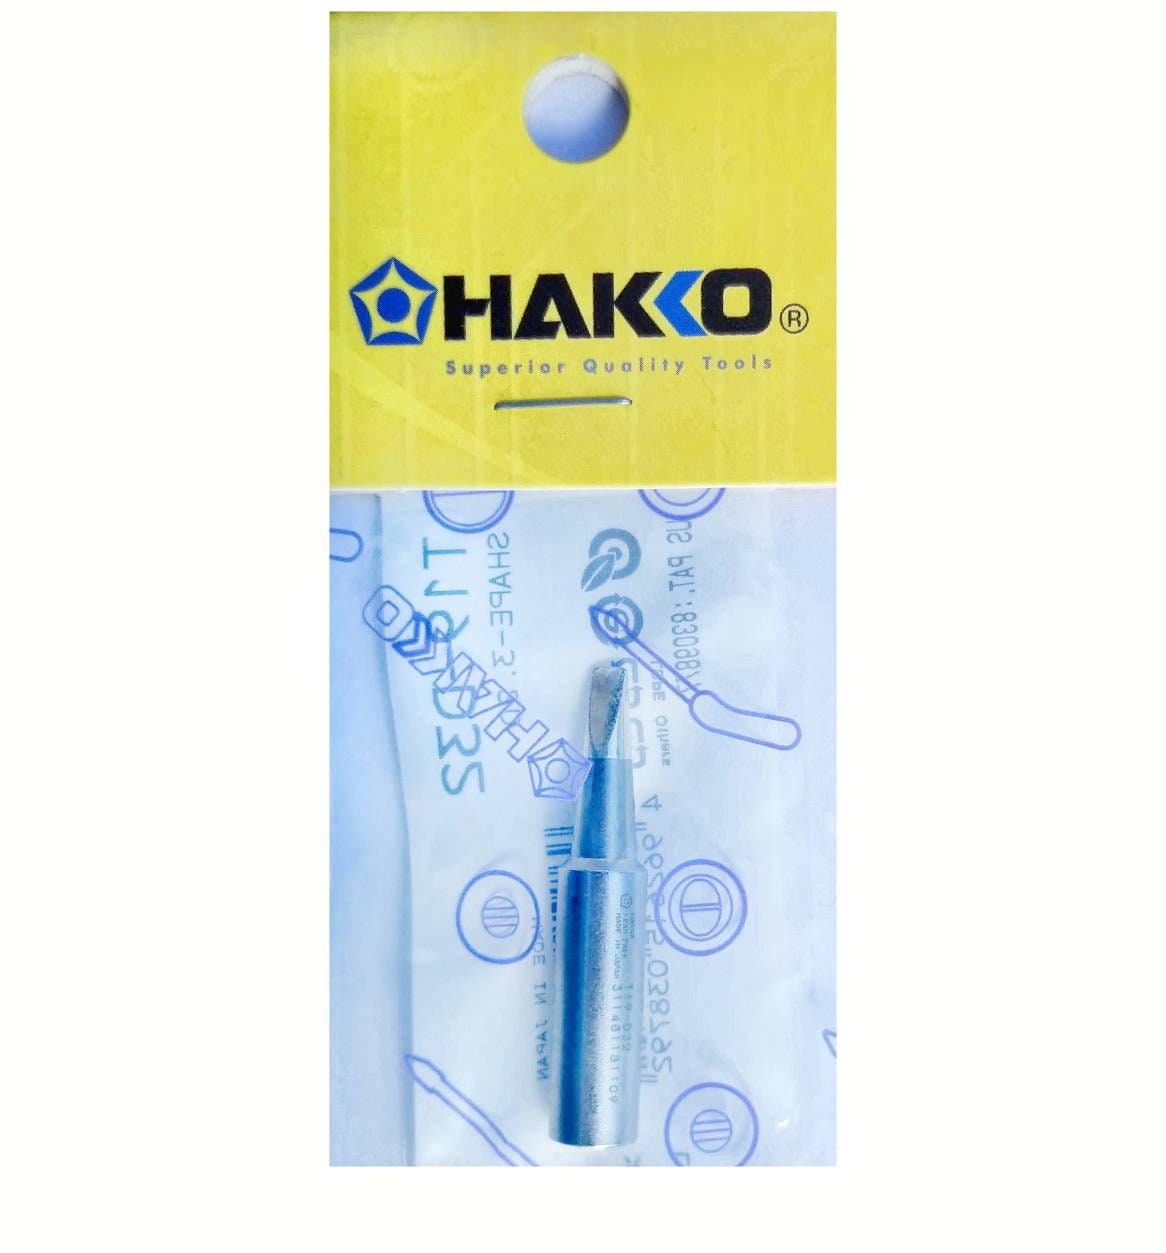 Hakko Soldering Iron Tip & Cleaner Set. Appropriate 1/8" size for decorative edge soldering, attach small rings, hooks, wire. 1/8" wide.